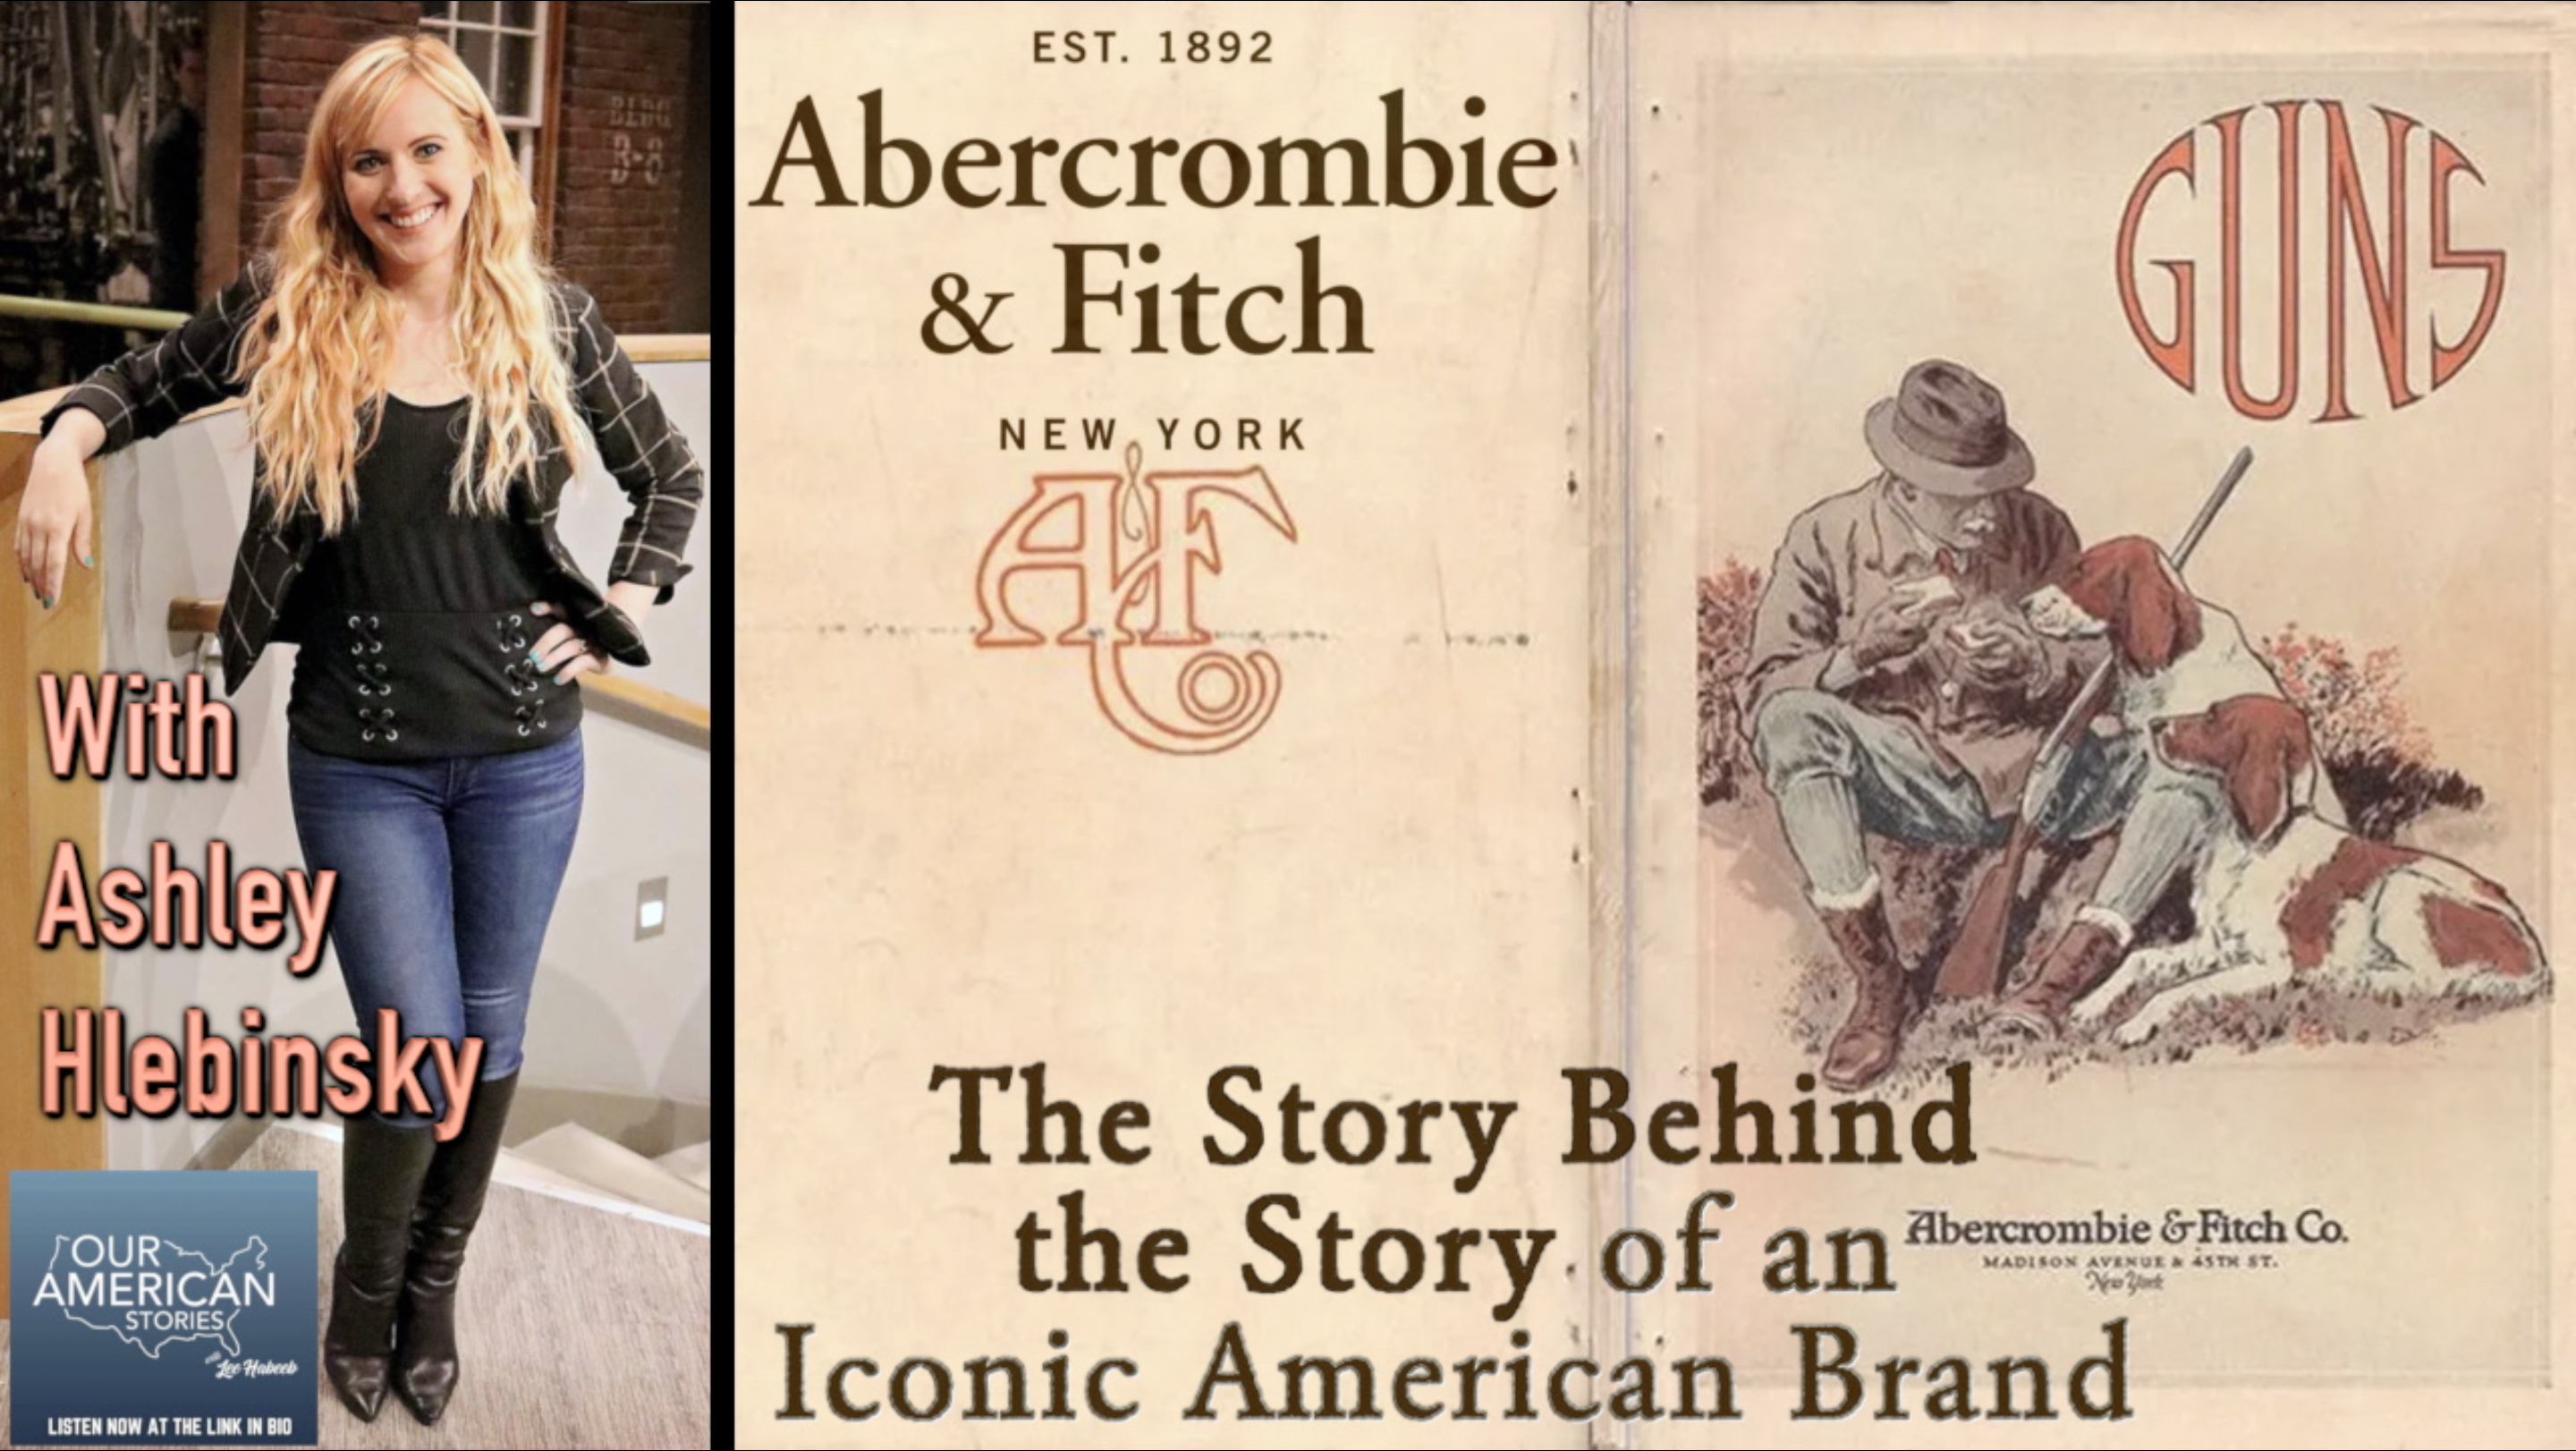 Abercrombie & Fitch: The Story Behind the Story of an Iconic American Brand